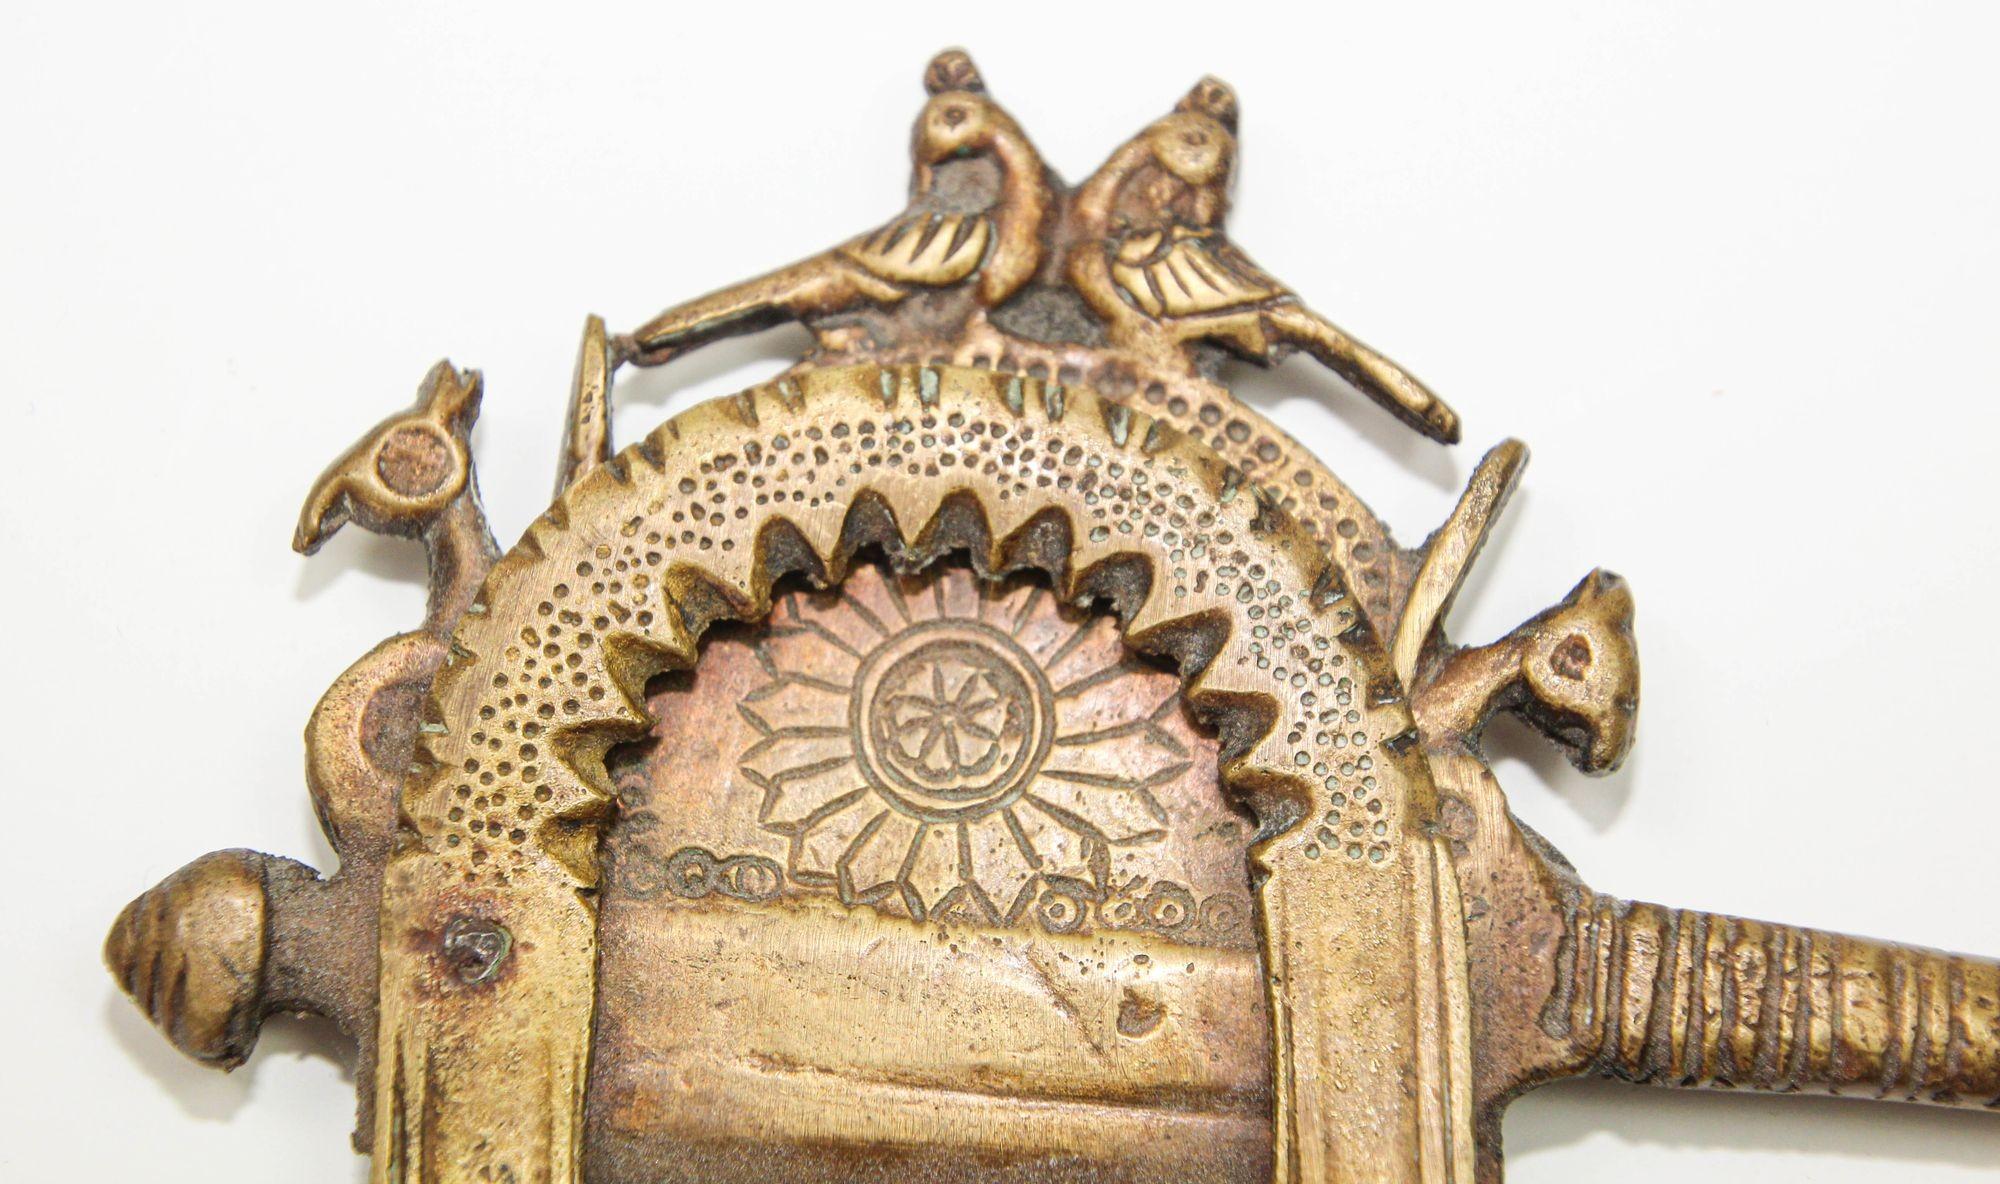 Folk Art Antique 19th C. Brass Betel Nut Cutter from India Collectible Asian Artifact For Sale